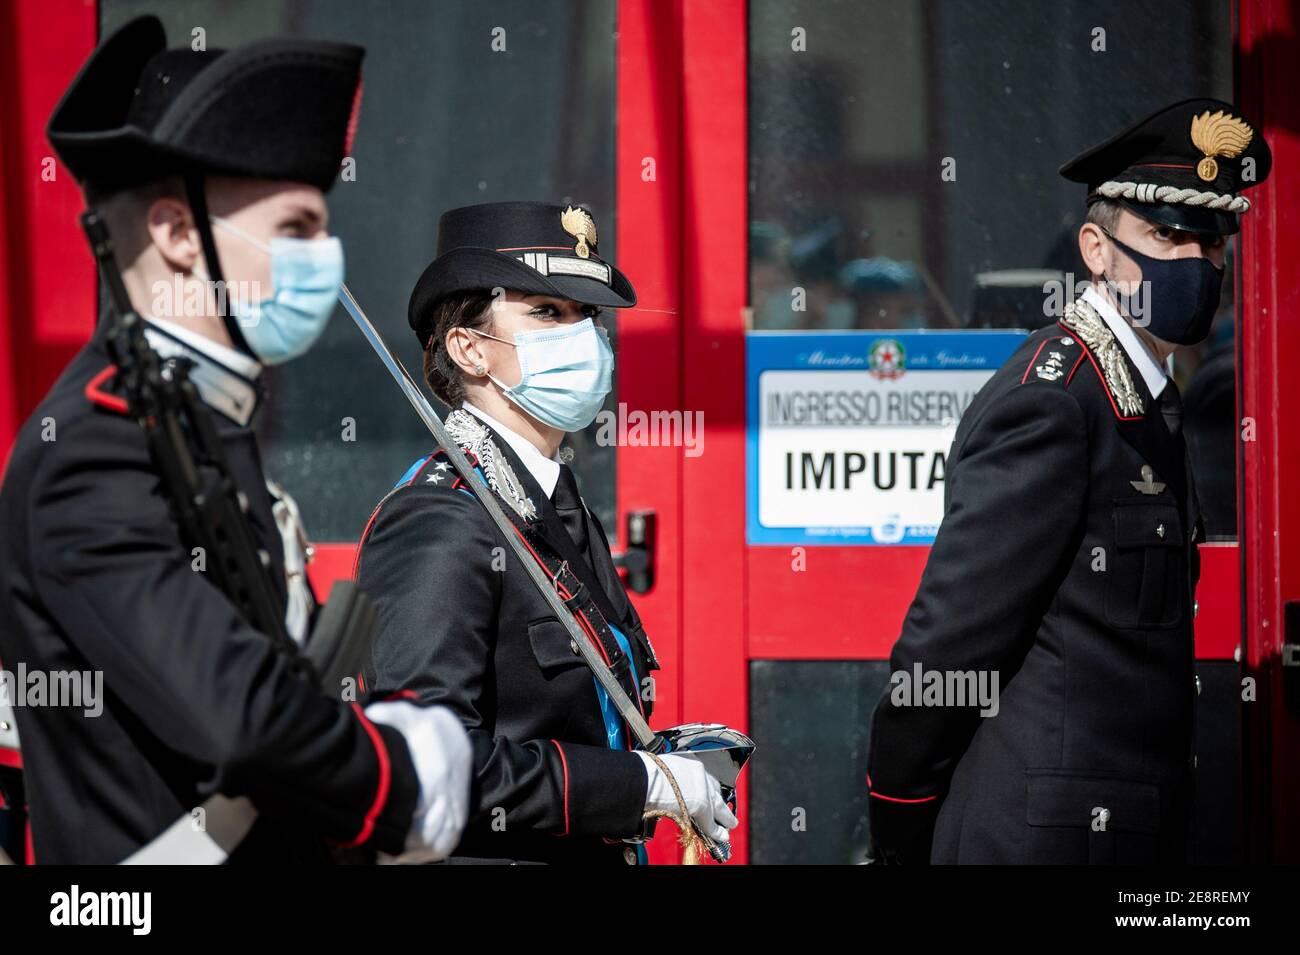 Representatives of Carabinieri are seen at the entrance to the bunker  room.Amidst the recent Government's crisis, Alfonso Bonafede, Minister of  Justice, attended the Inauguration of the Judicial Year 2021 at the High